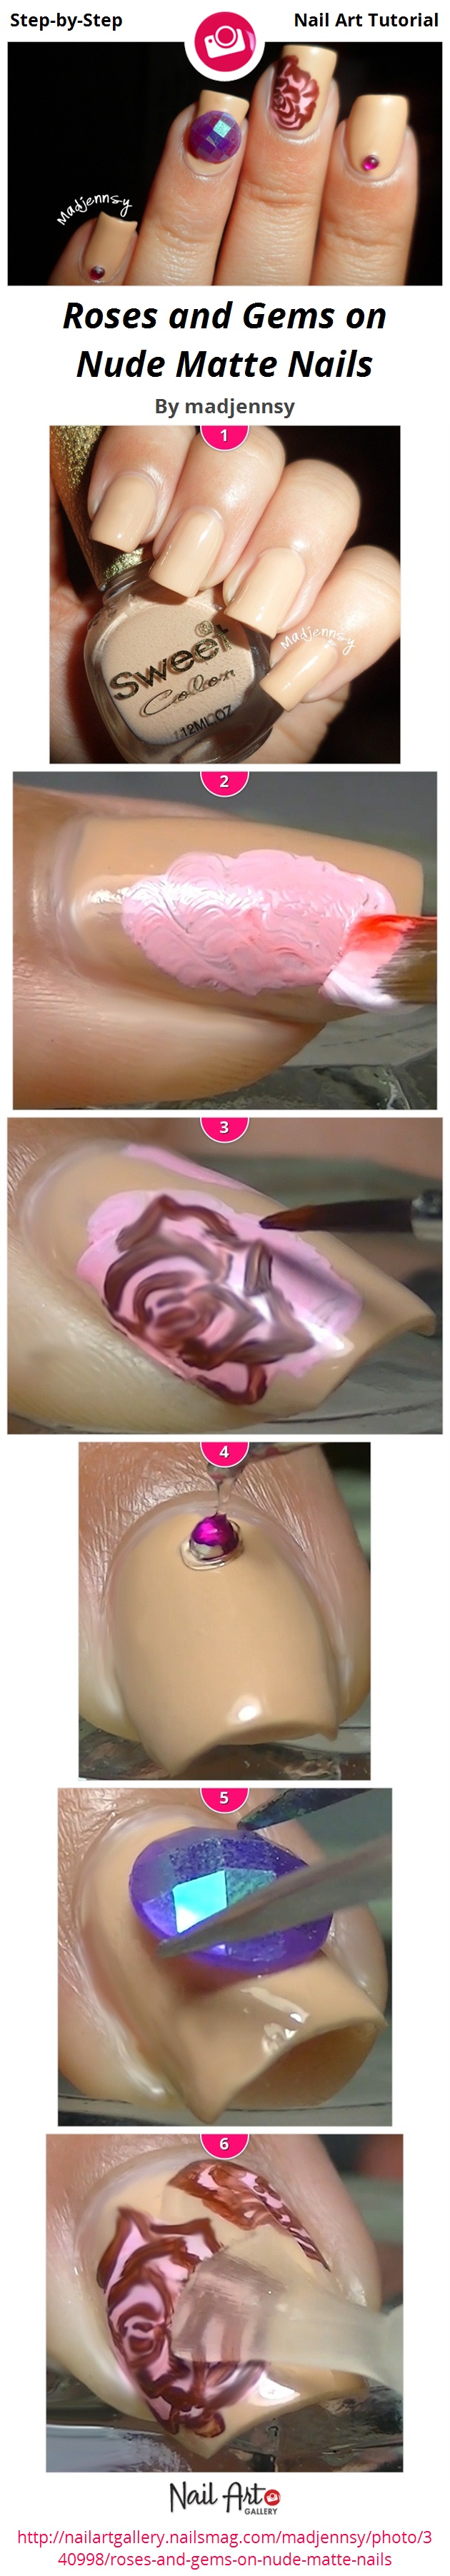 Roses and Gems on Nude Matte Nails - Nail Art Gallery